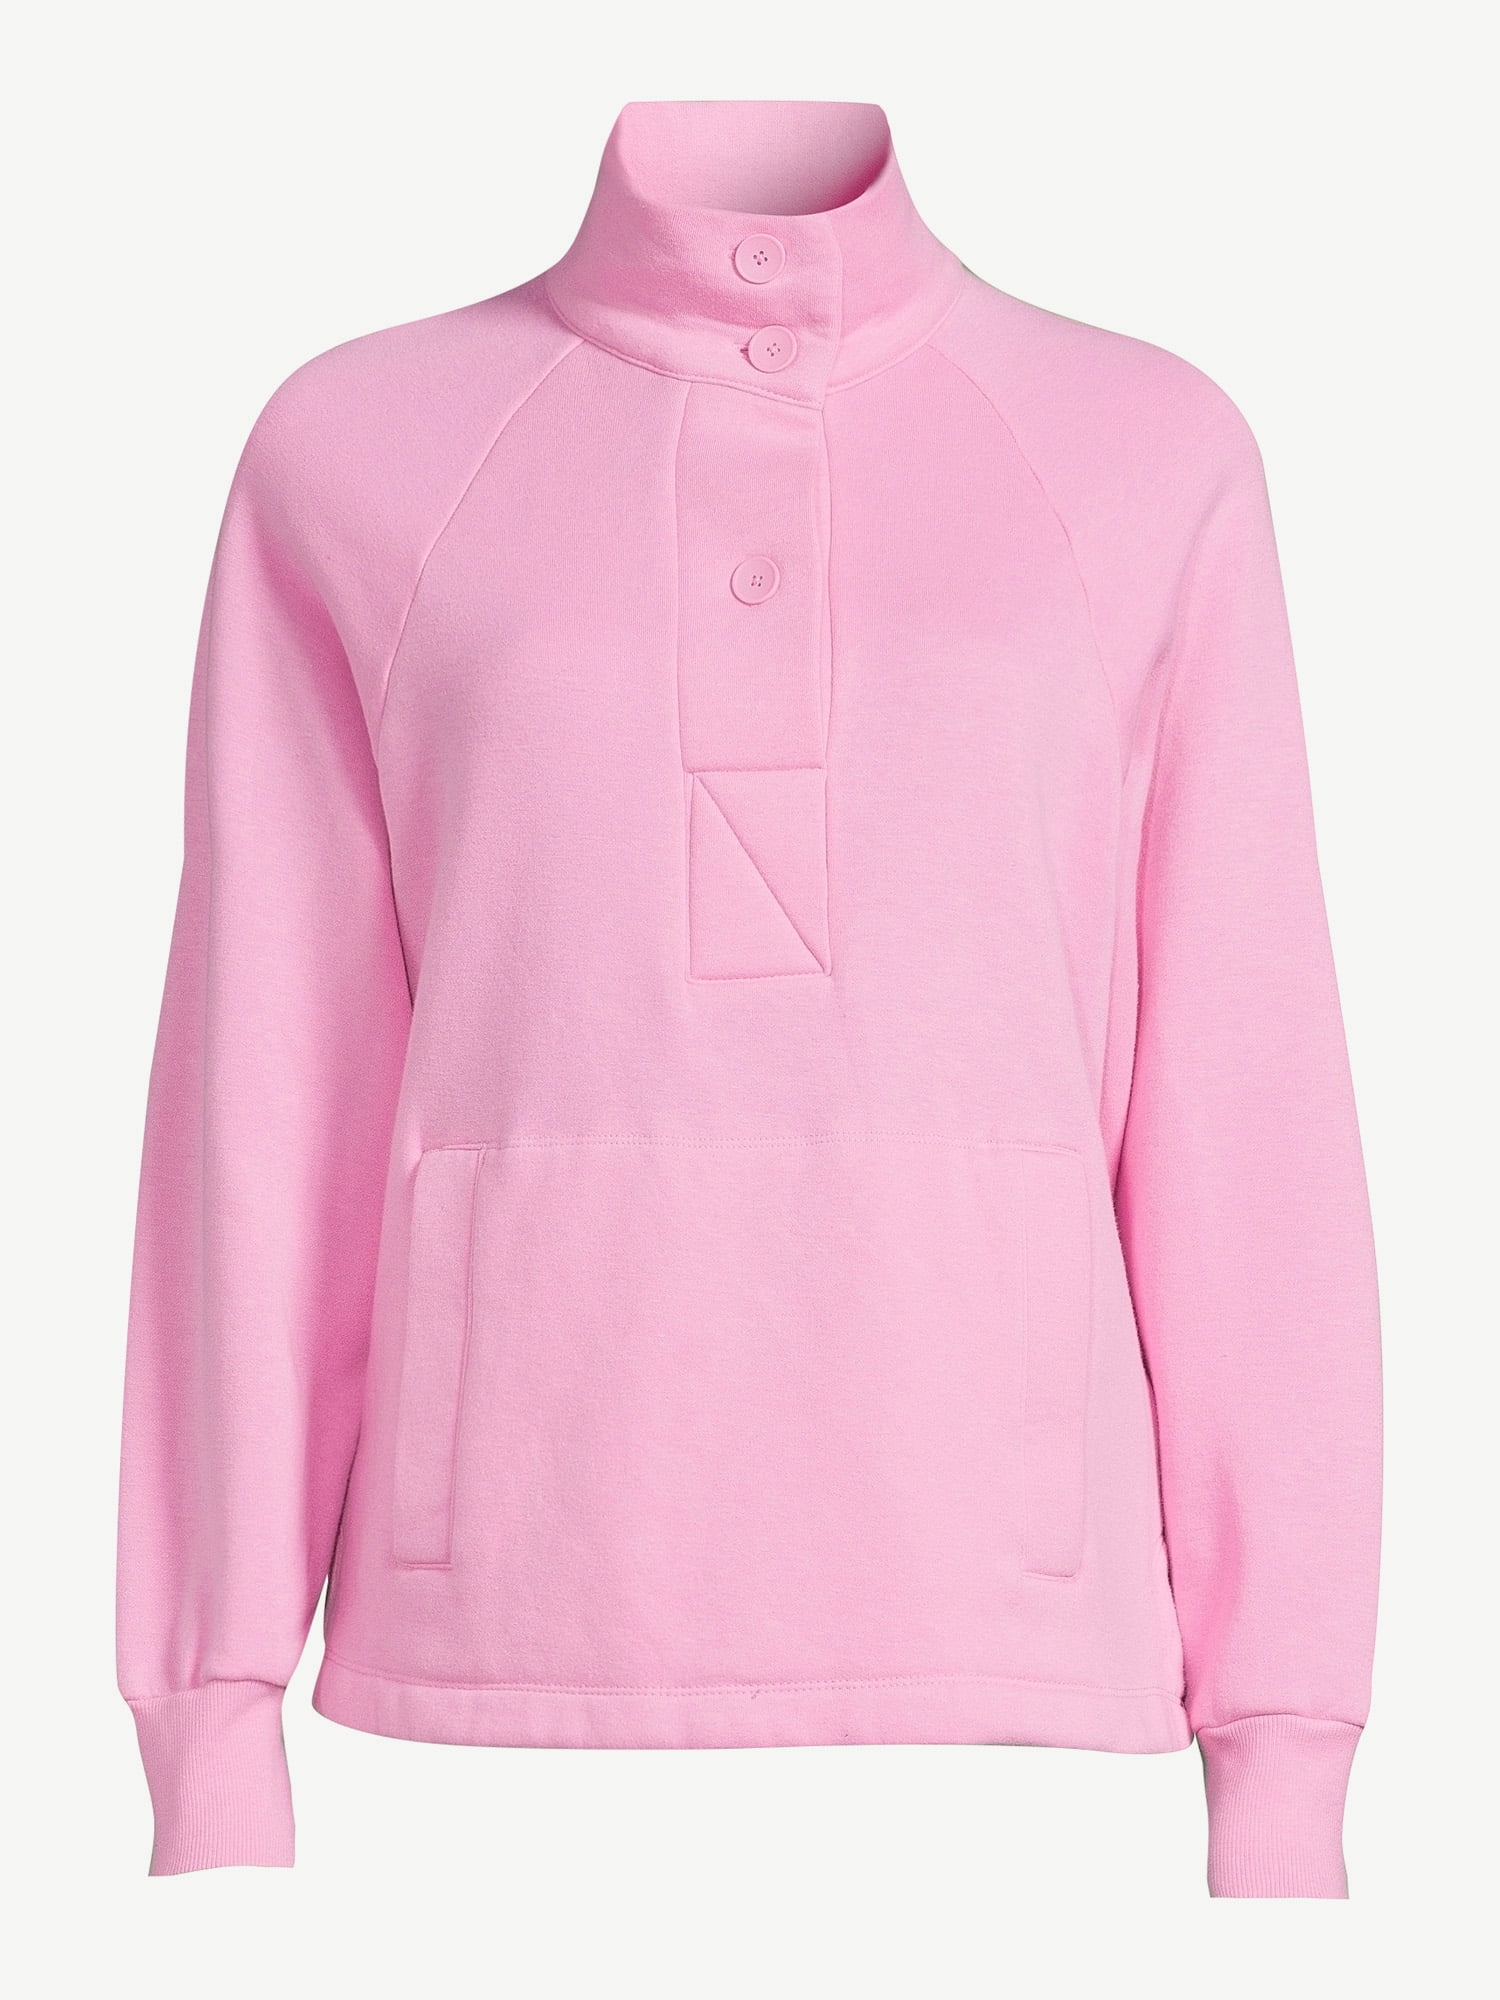 HUMMHUANJ Hoodies For Women 2 Piece Outfits,polo sweater,rewards points  balance in my account,cute stuff under 1 dollar,hot pink shirt,festival